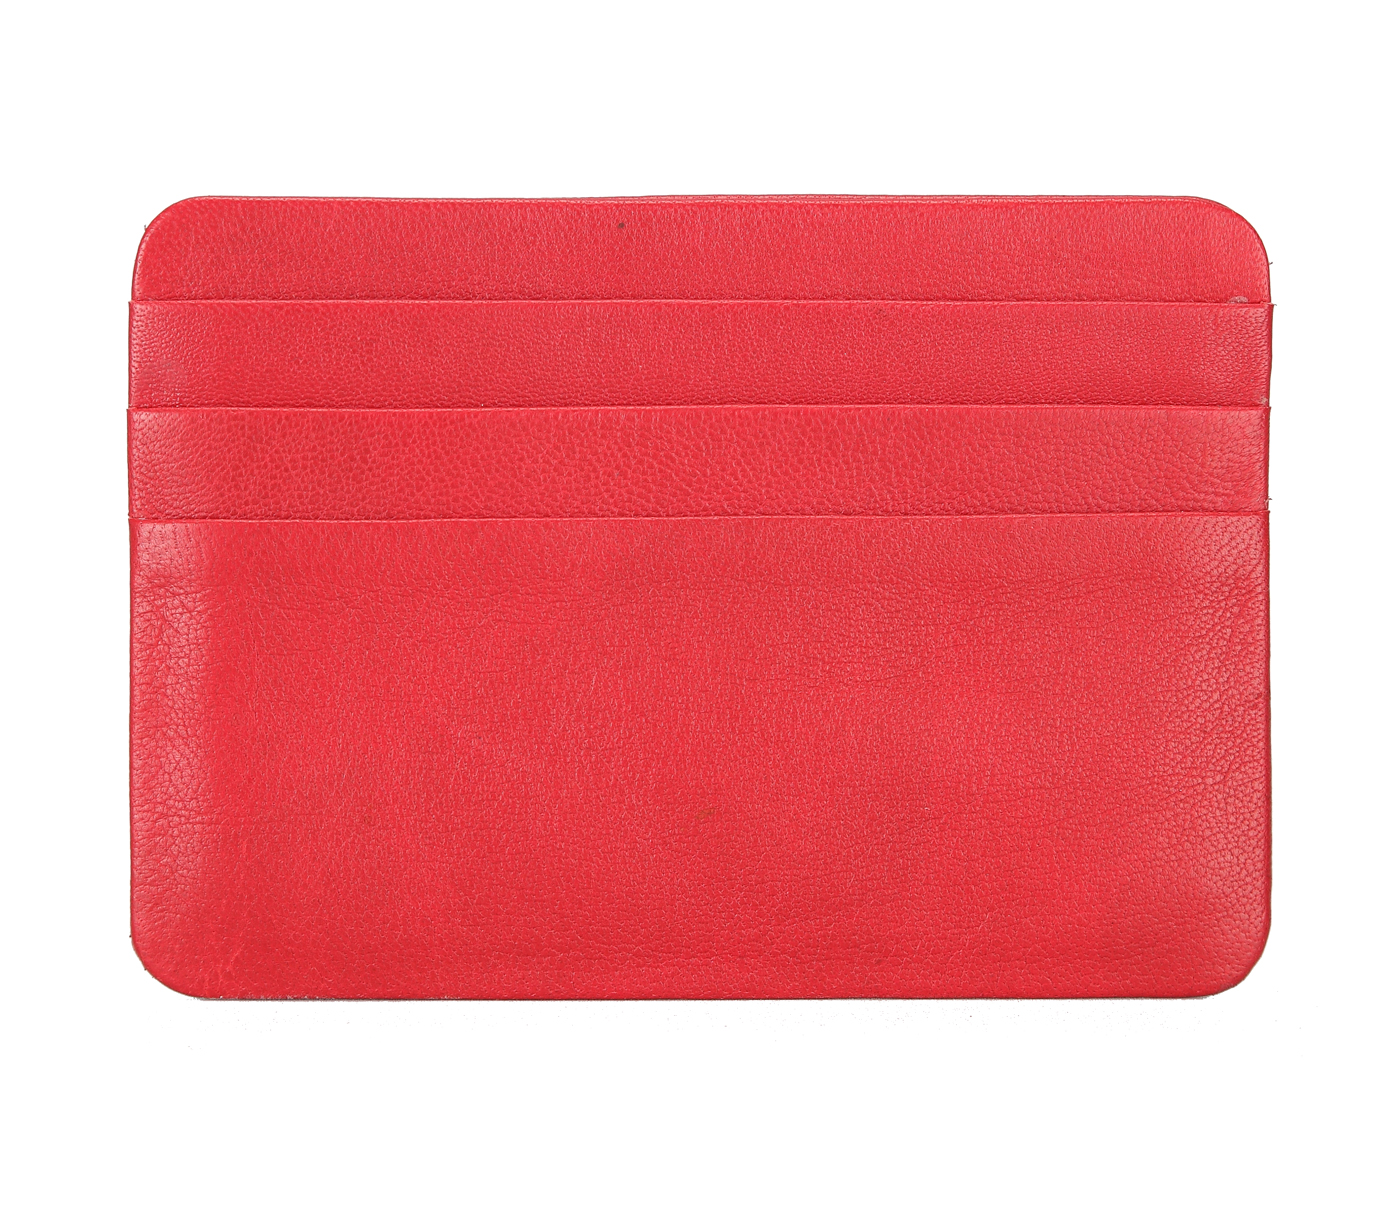 VW8--Ultra Slim card Case in Genuine Leather - Red